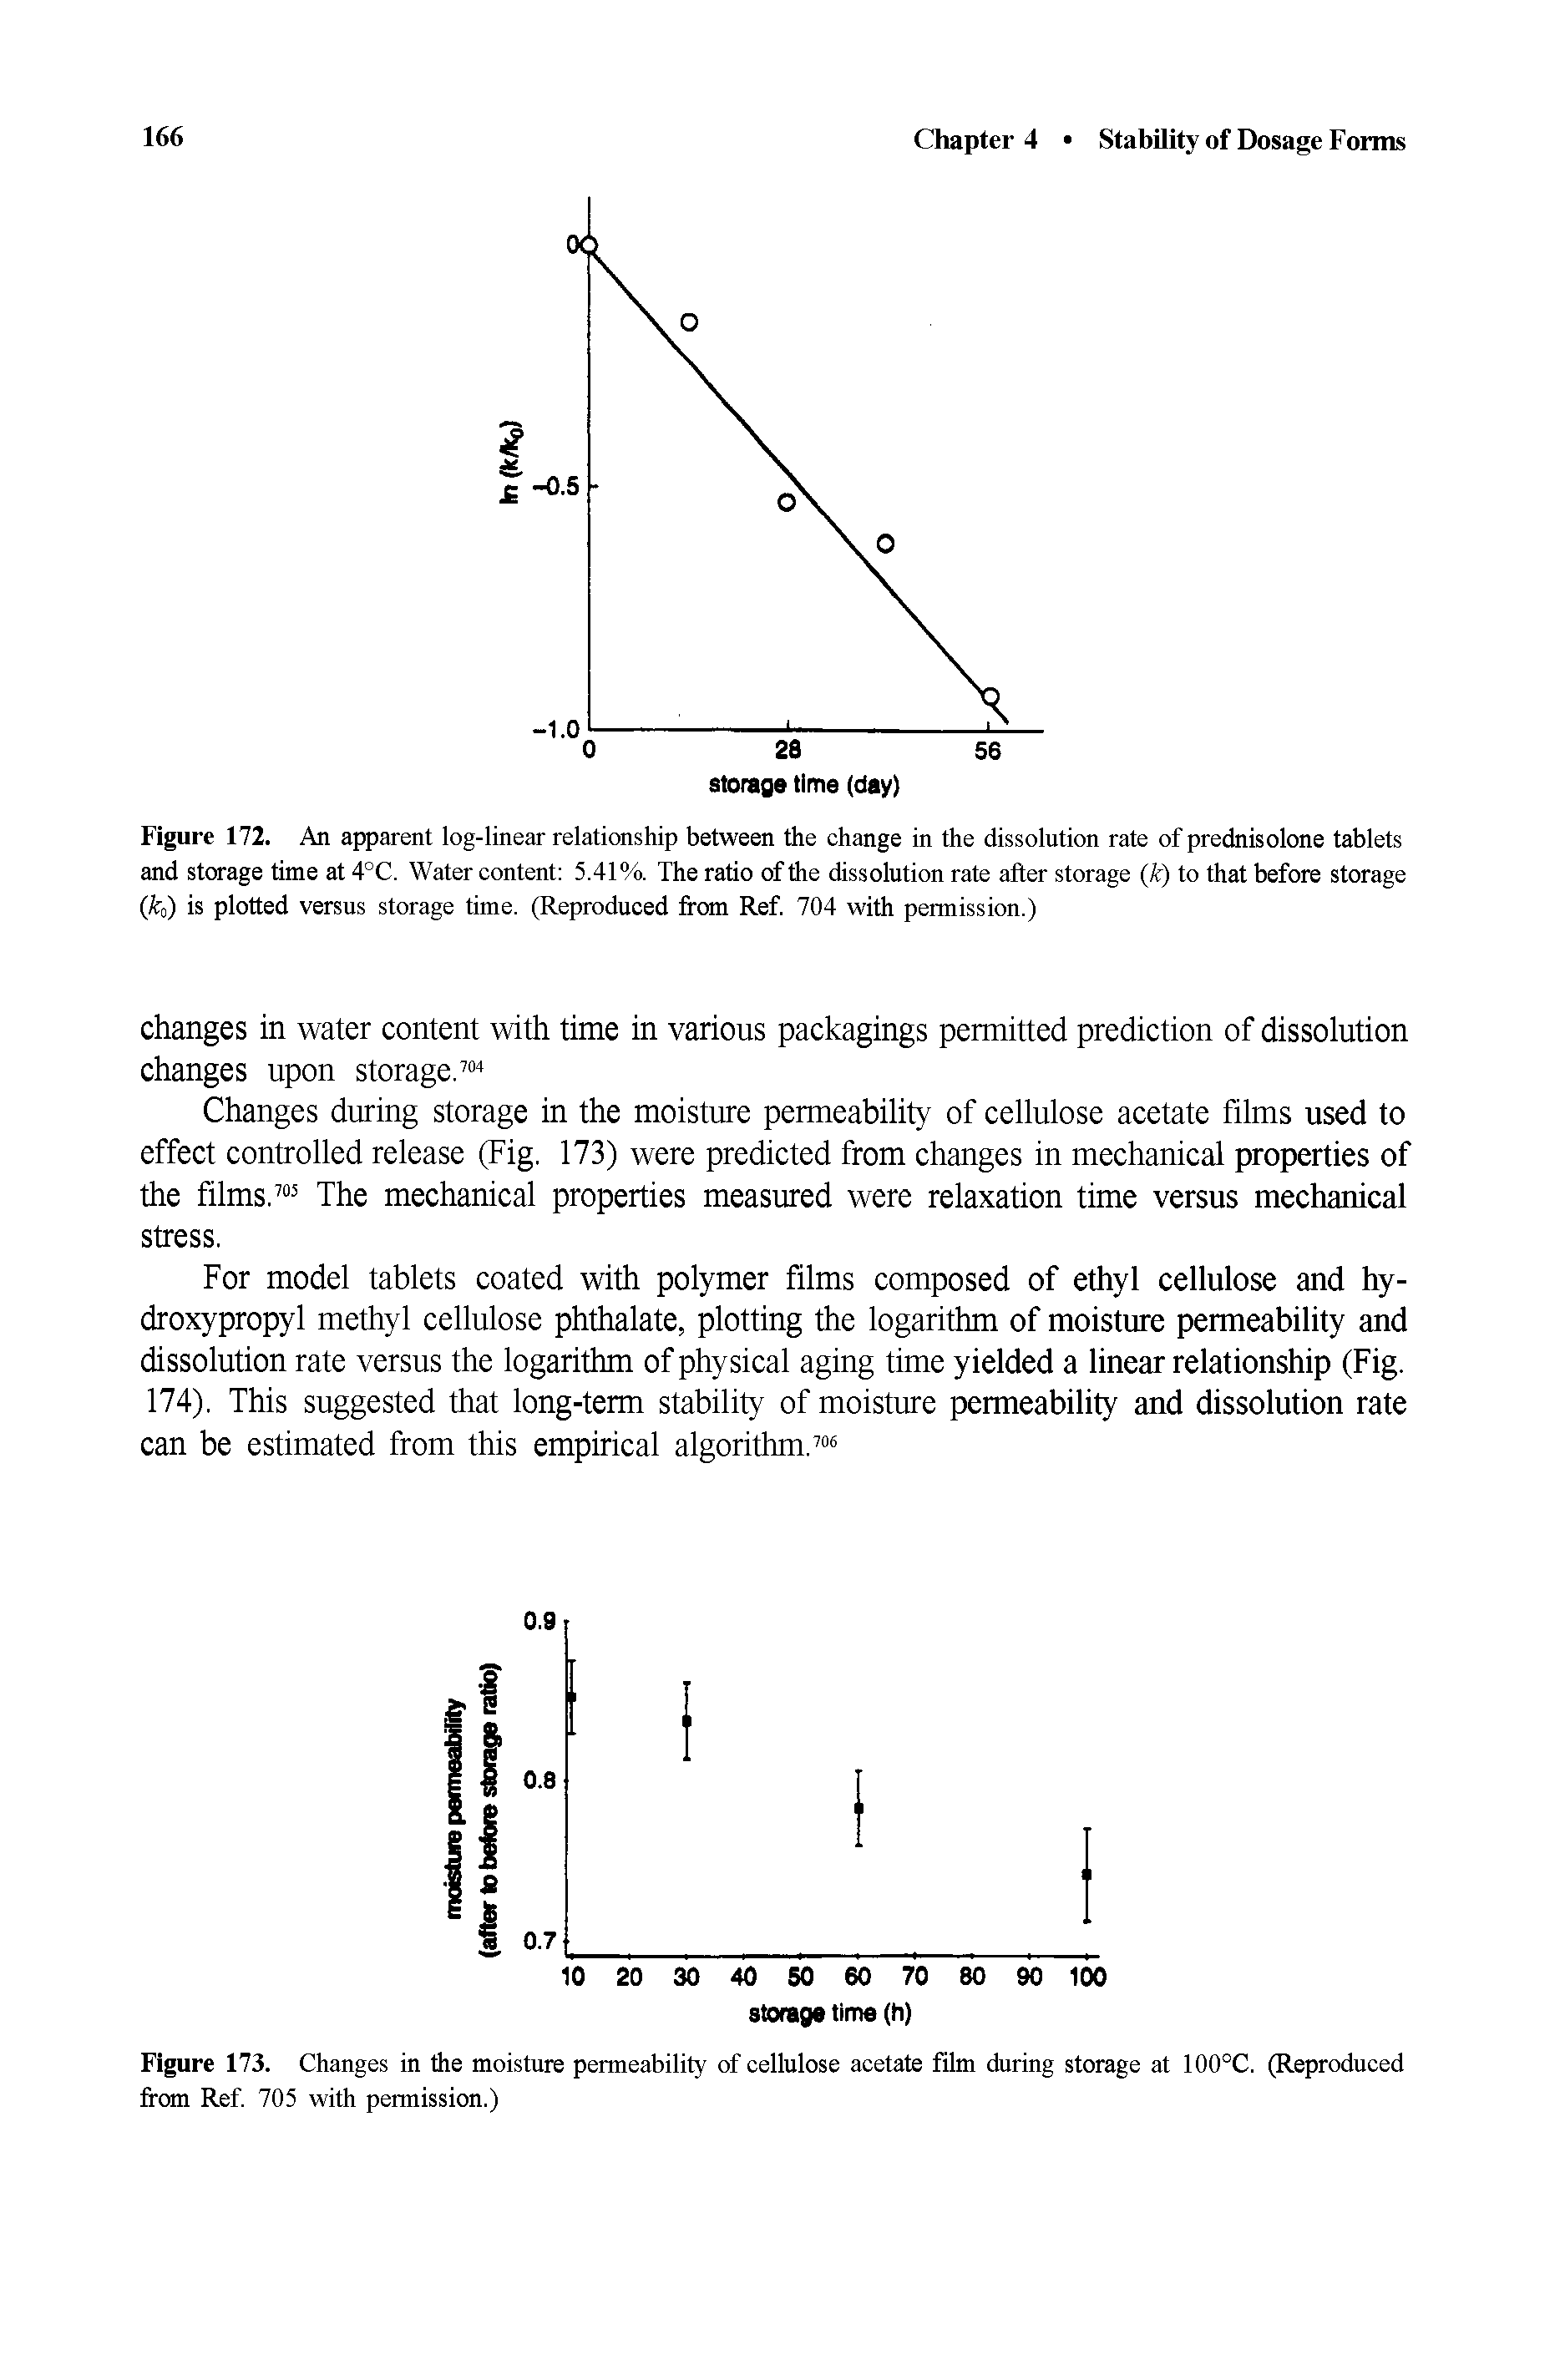 Figure 172. An apparent log-linear relationship between the change in the dissolution rate of prednisolone tablets and storage time at 4°C. Water content 5.41%. The ratio of the dissolution rate after storage (k) to that before storage (h) is plotted versus storage time. (Reproduced from Ref. 704 with permission.)...